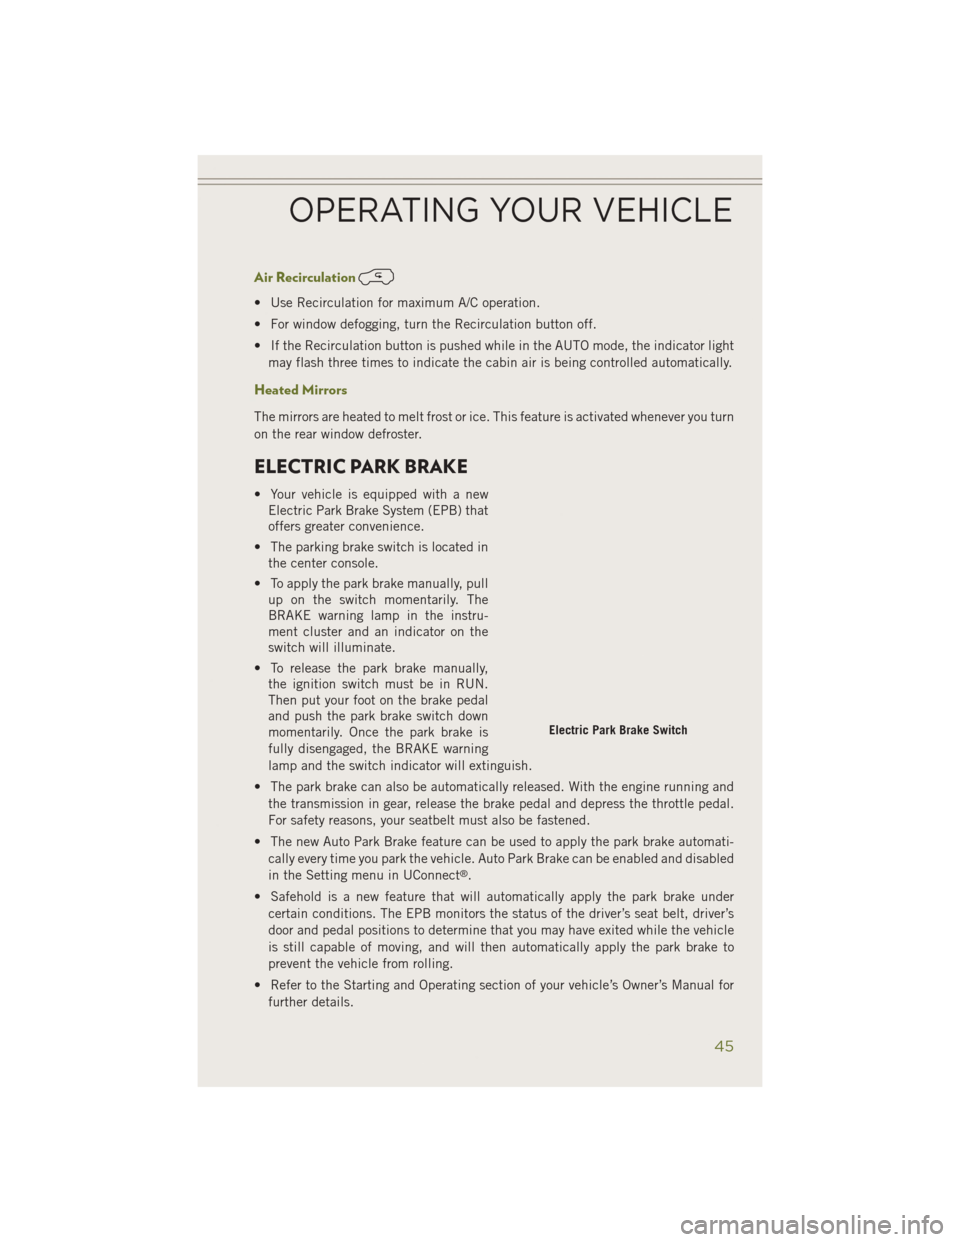 JEEP CHEROKEE 2014 KL / 5.G User Guide Air Recirculation
• Use Recirculation for maximum A/C operation.
• For window defogging, turn the Recirculation button off.
• If the Recirculation button is pushed while in the AUTO mode, the in